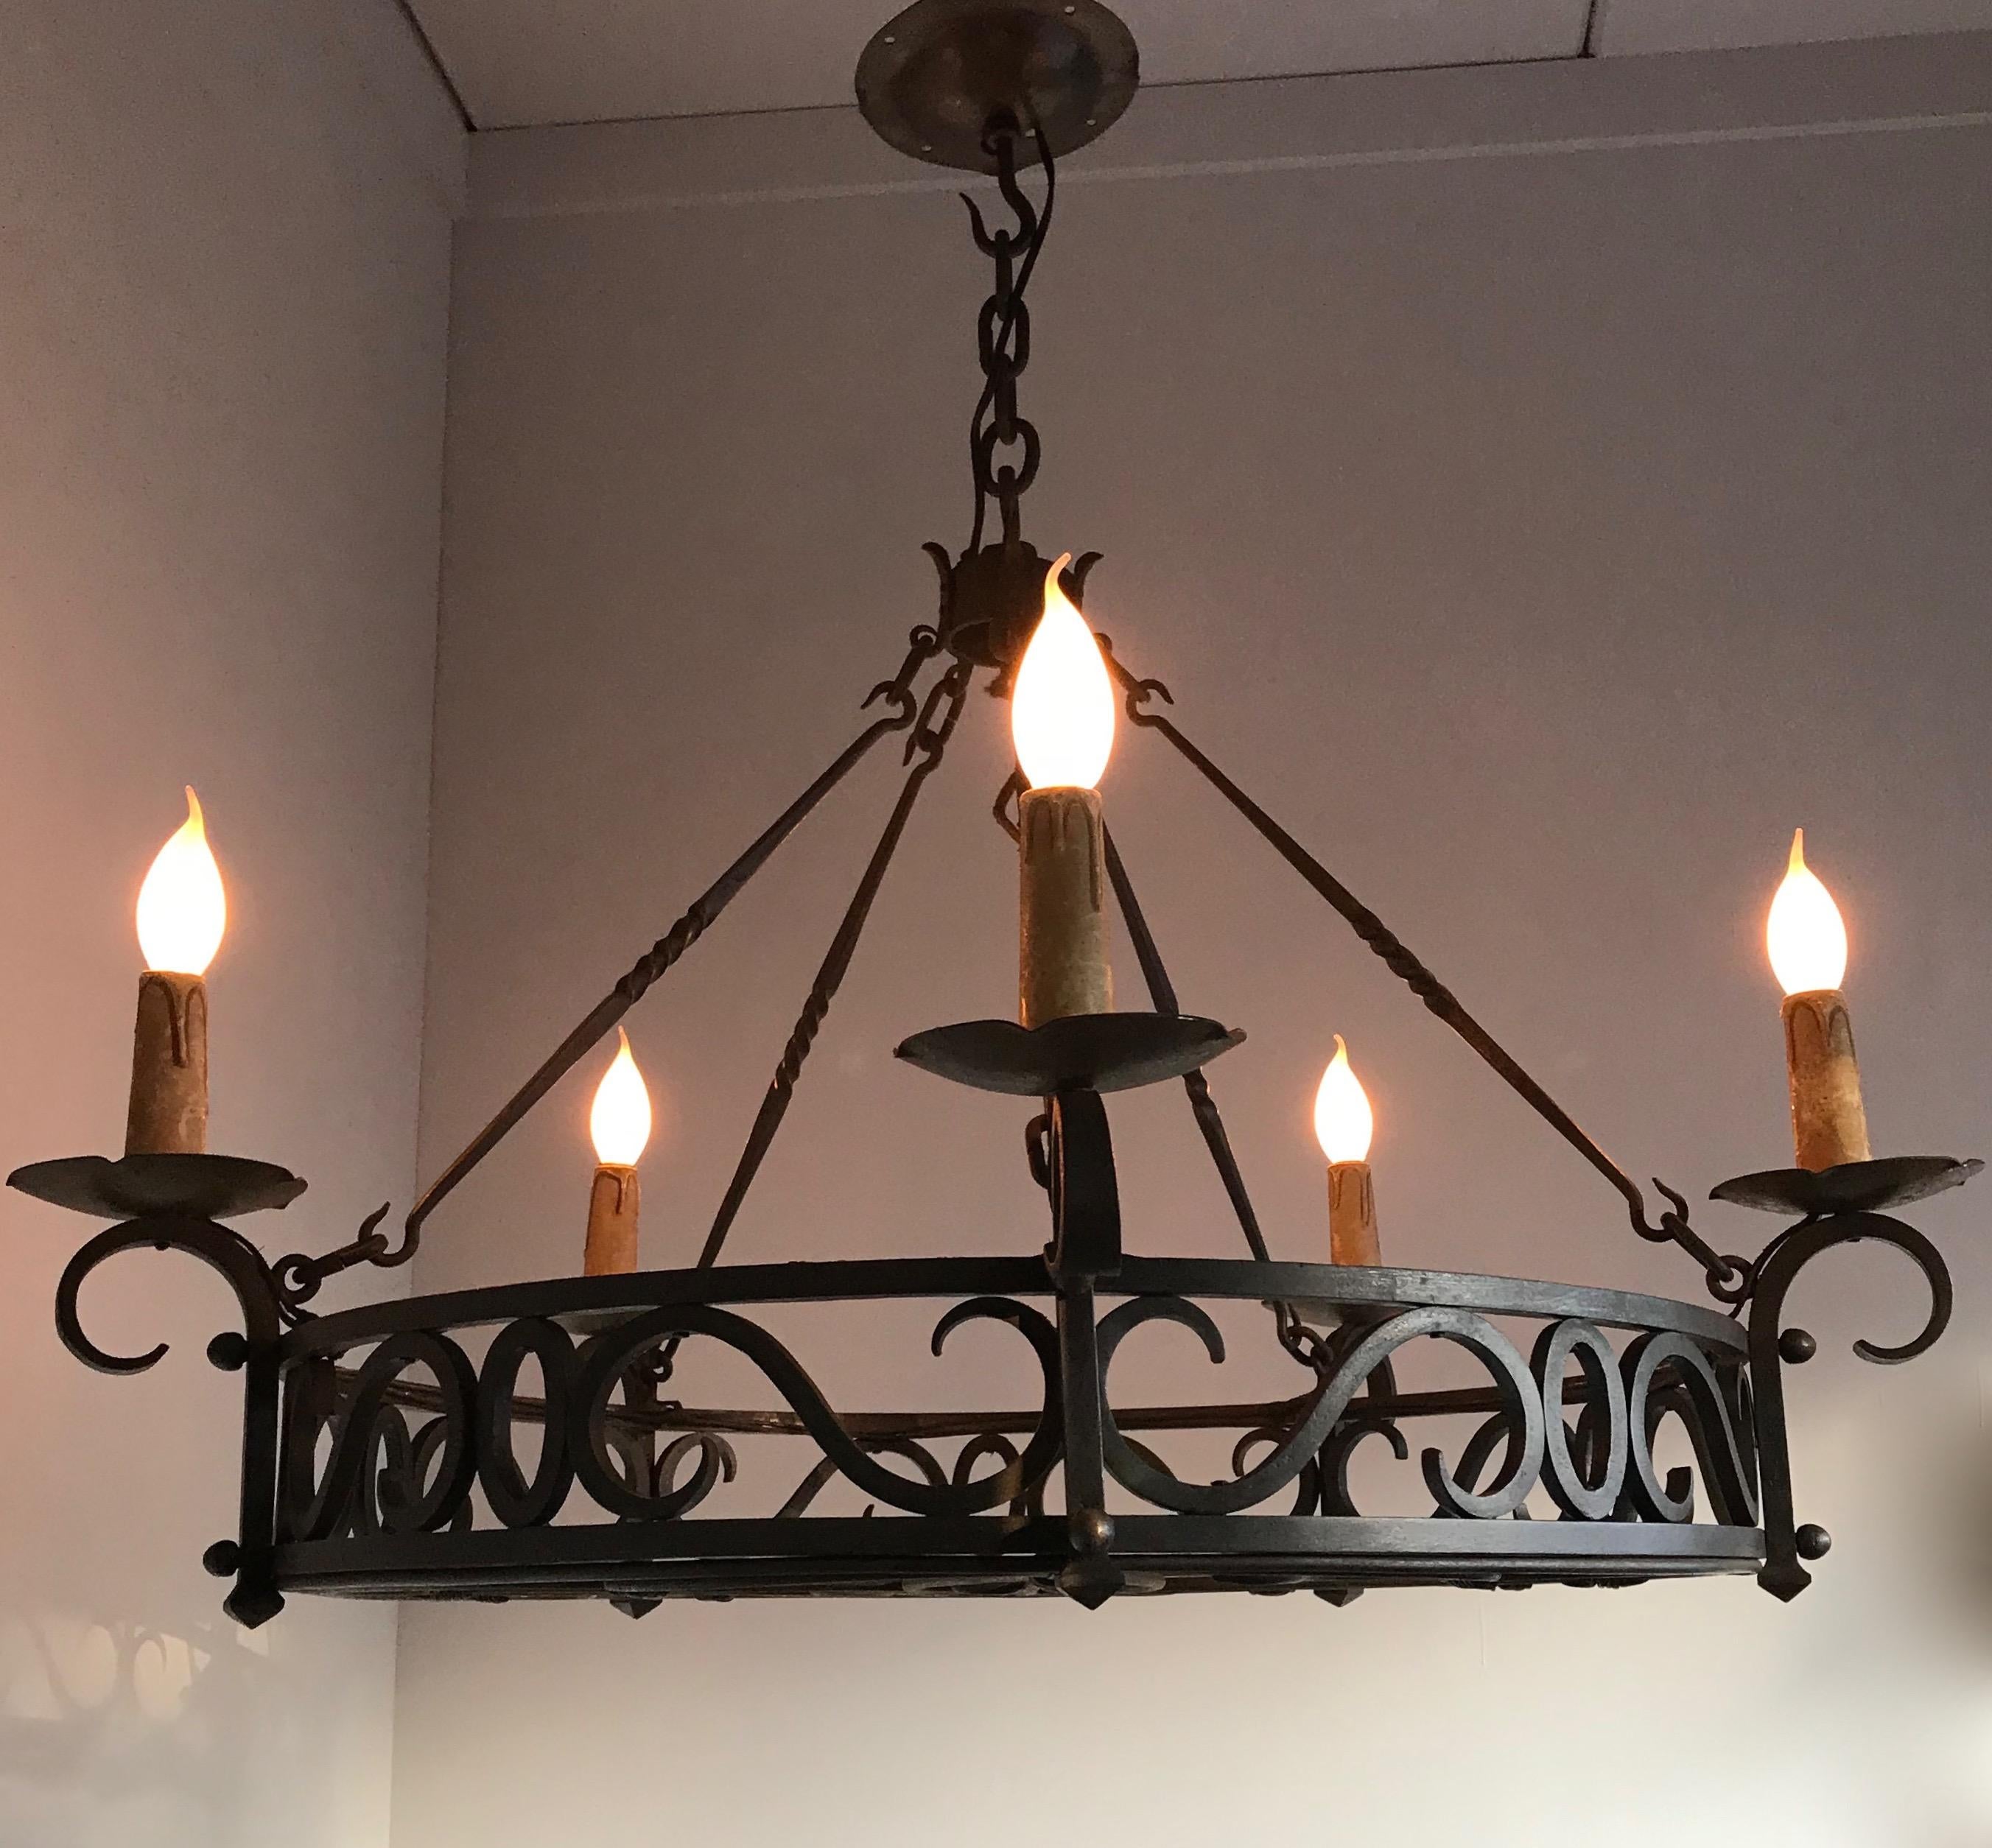 Museum quality, forged in fire castle design pendant light.

This good quality and all hand-forged chandelier comes with beautiful and artistic details which certainly lifts it above the average. In the right space it will look the business and we